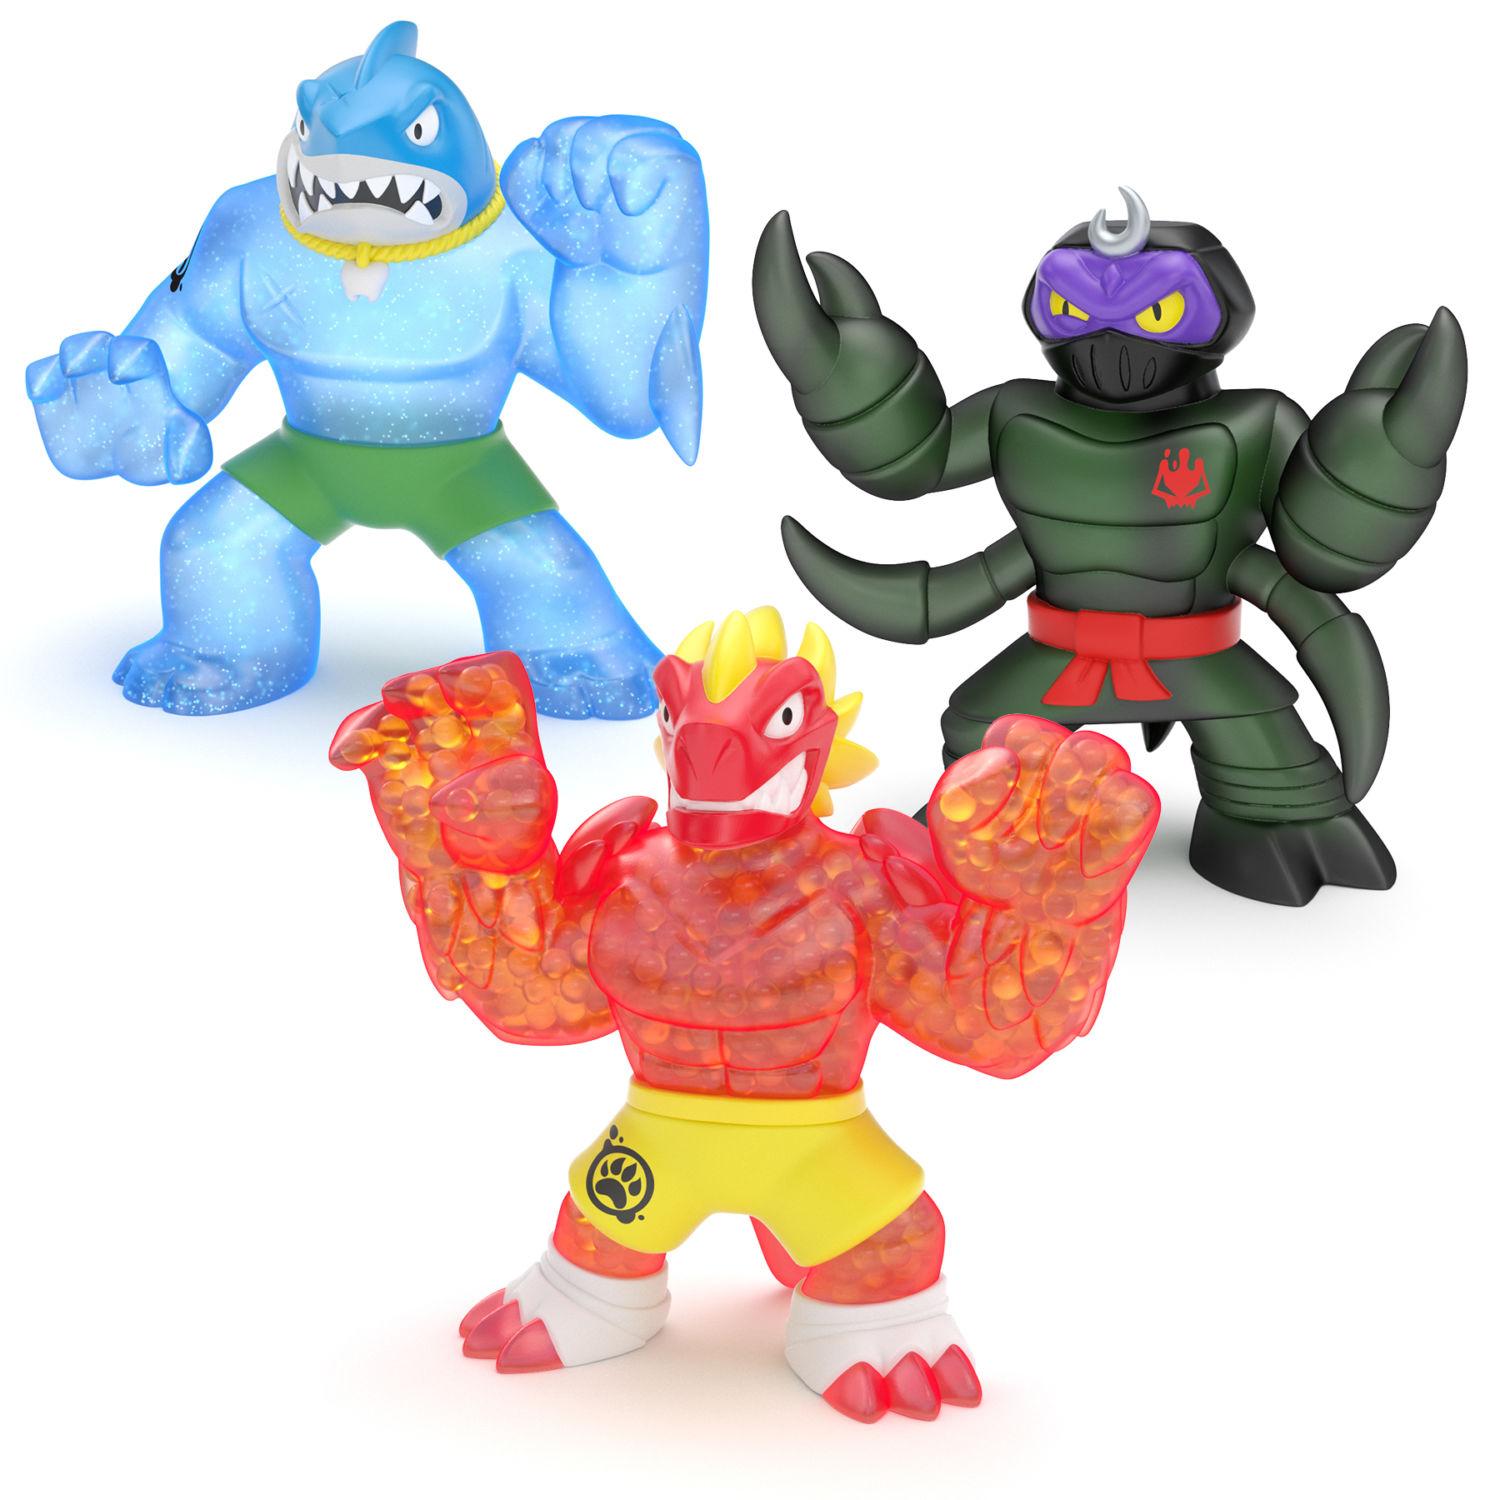 New Heroes of Goo Jit Zu Action Figures Stretch Squish and More